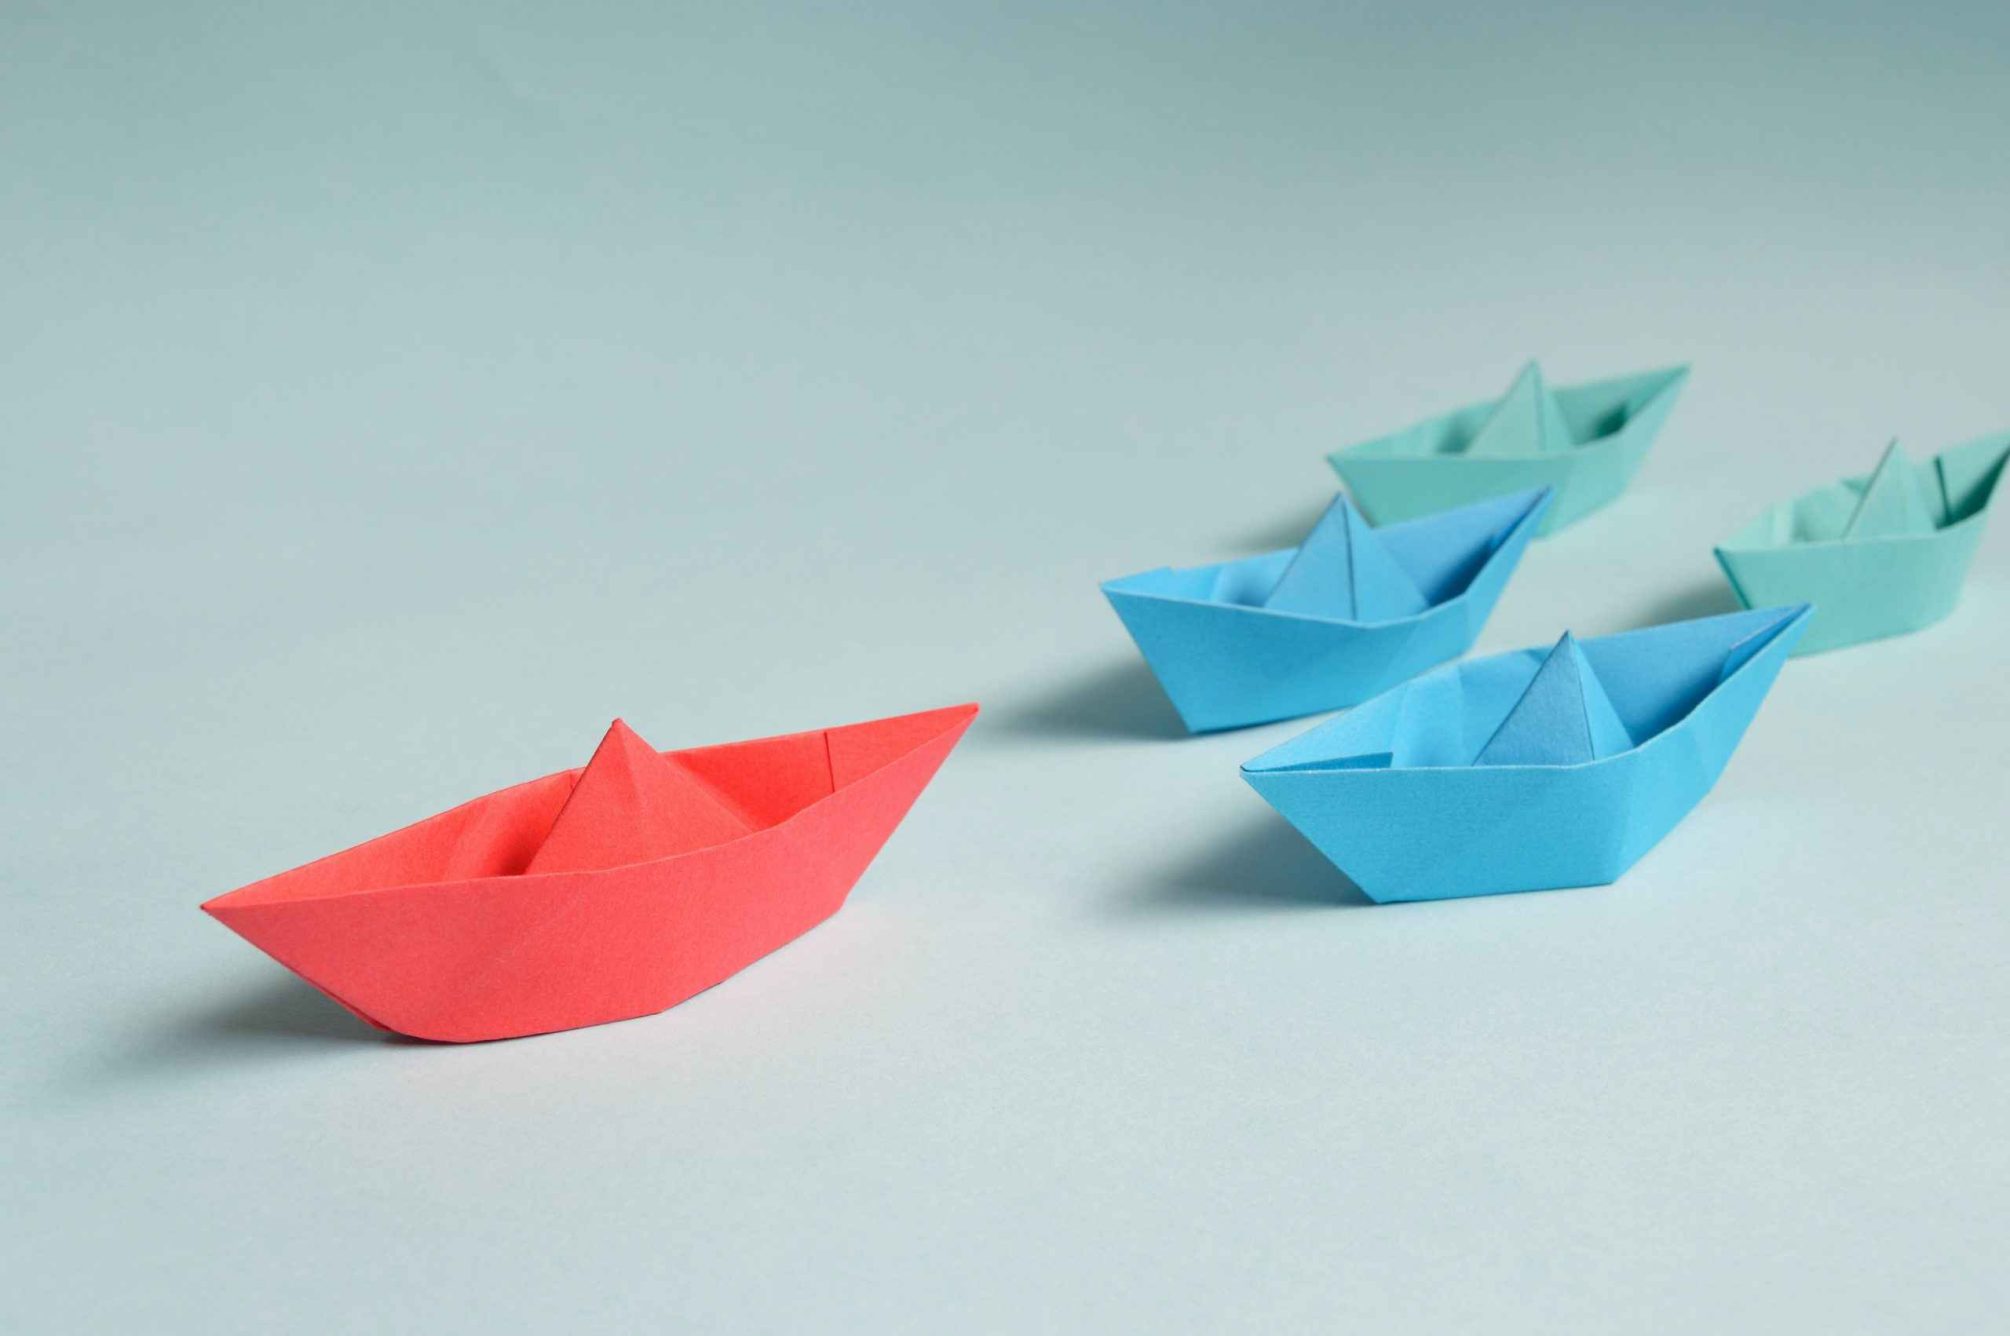 greenloopsolutions - Picture of five paper boat